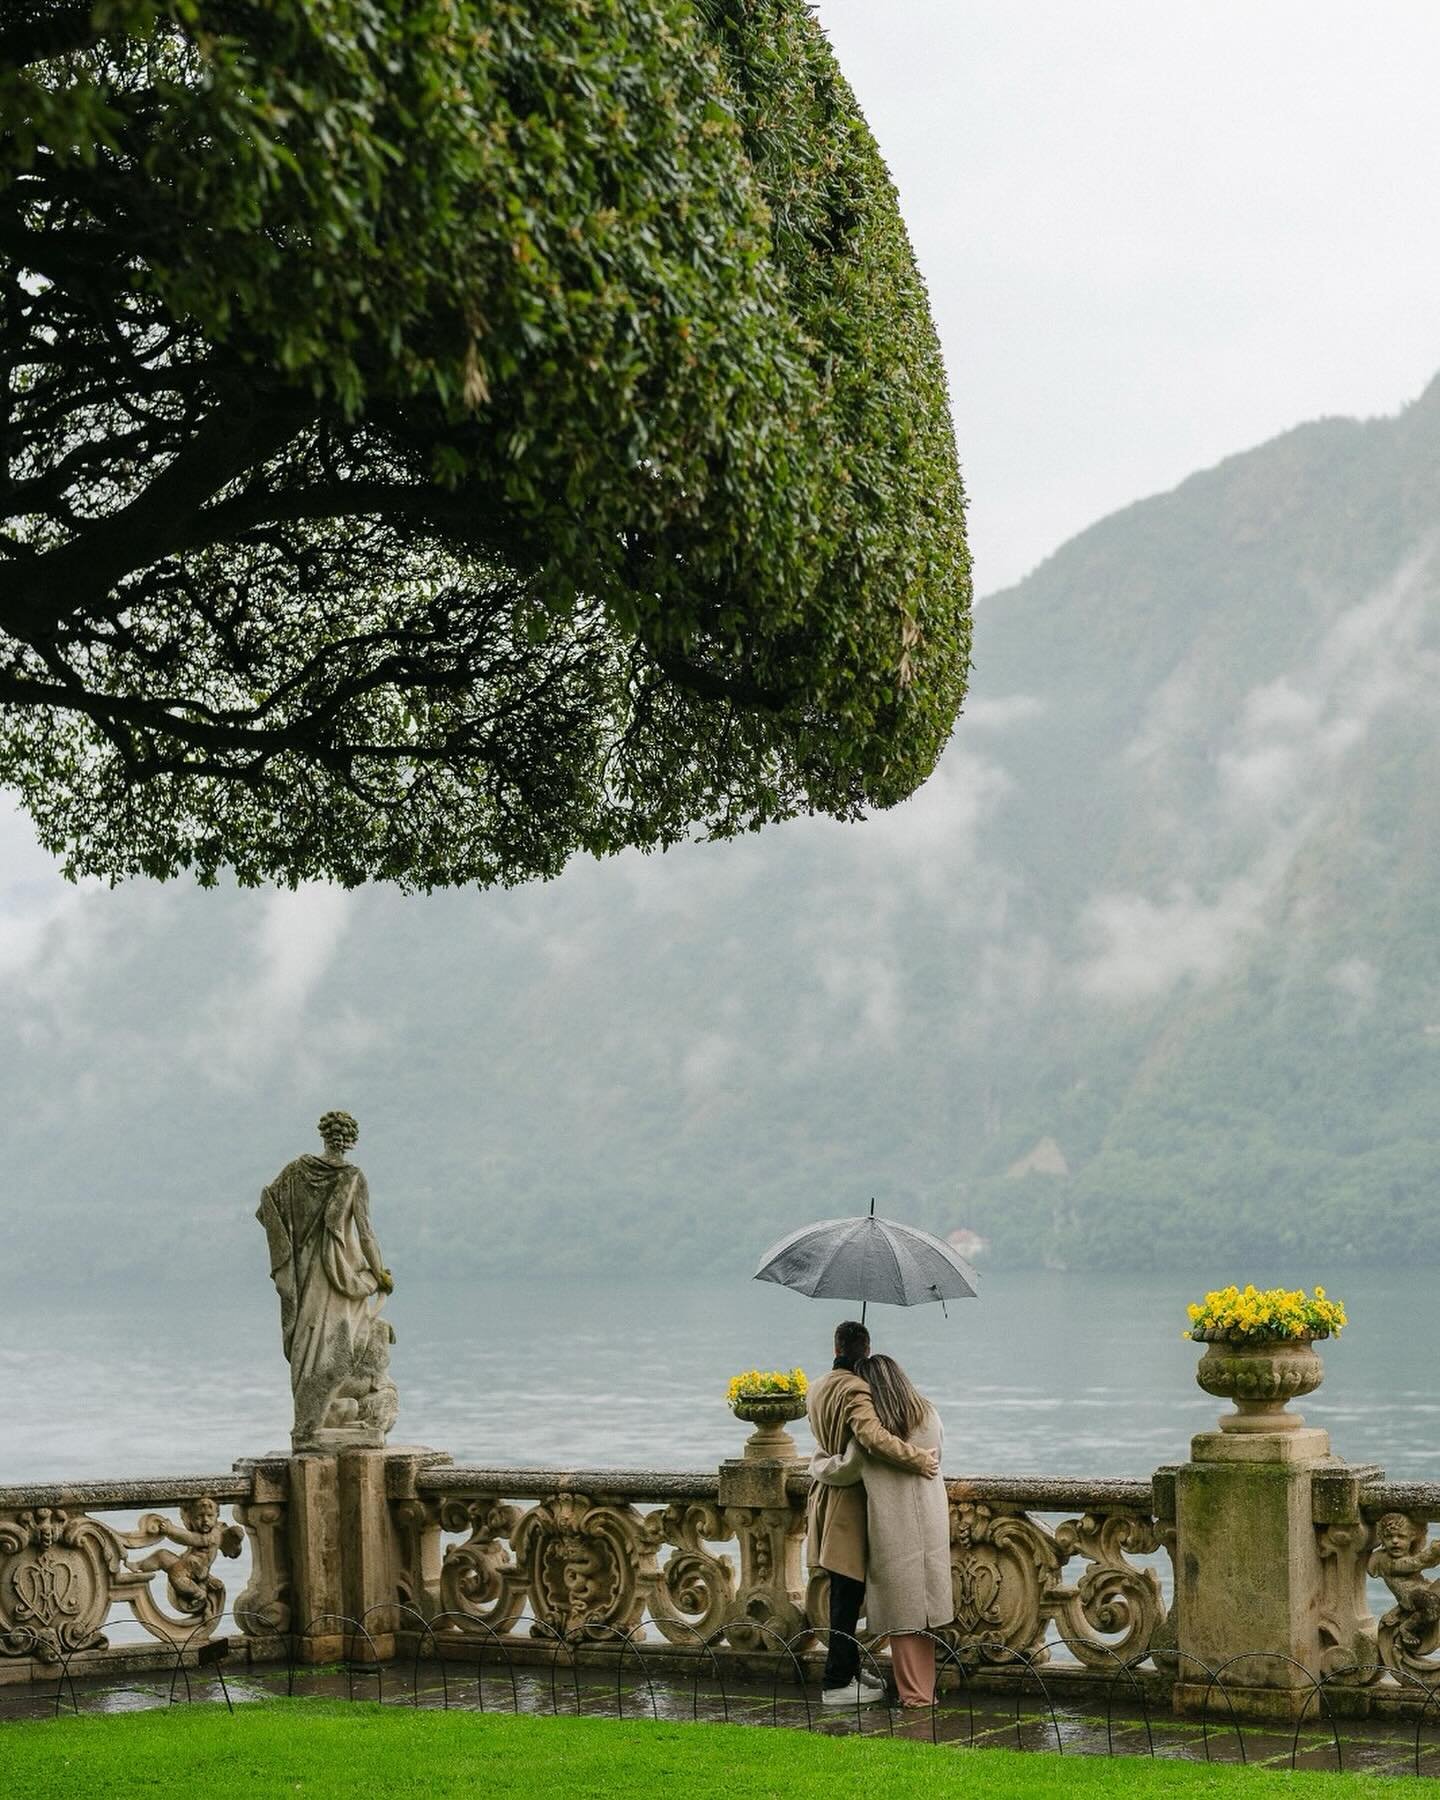 A lovely engagement session at Villa del Balbianello in Lake Como.  Magic with rain&hellip;  Love always shines. #lakecomo #villabalbianello #lakecomowedding #lakecomoengagement #lakecomoproposal #lakecomoelopement #villabalbianellowedding #villabalb